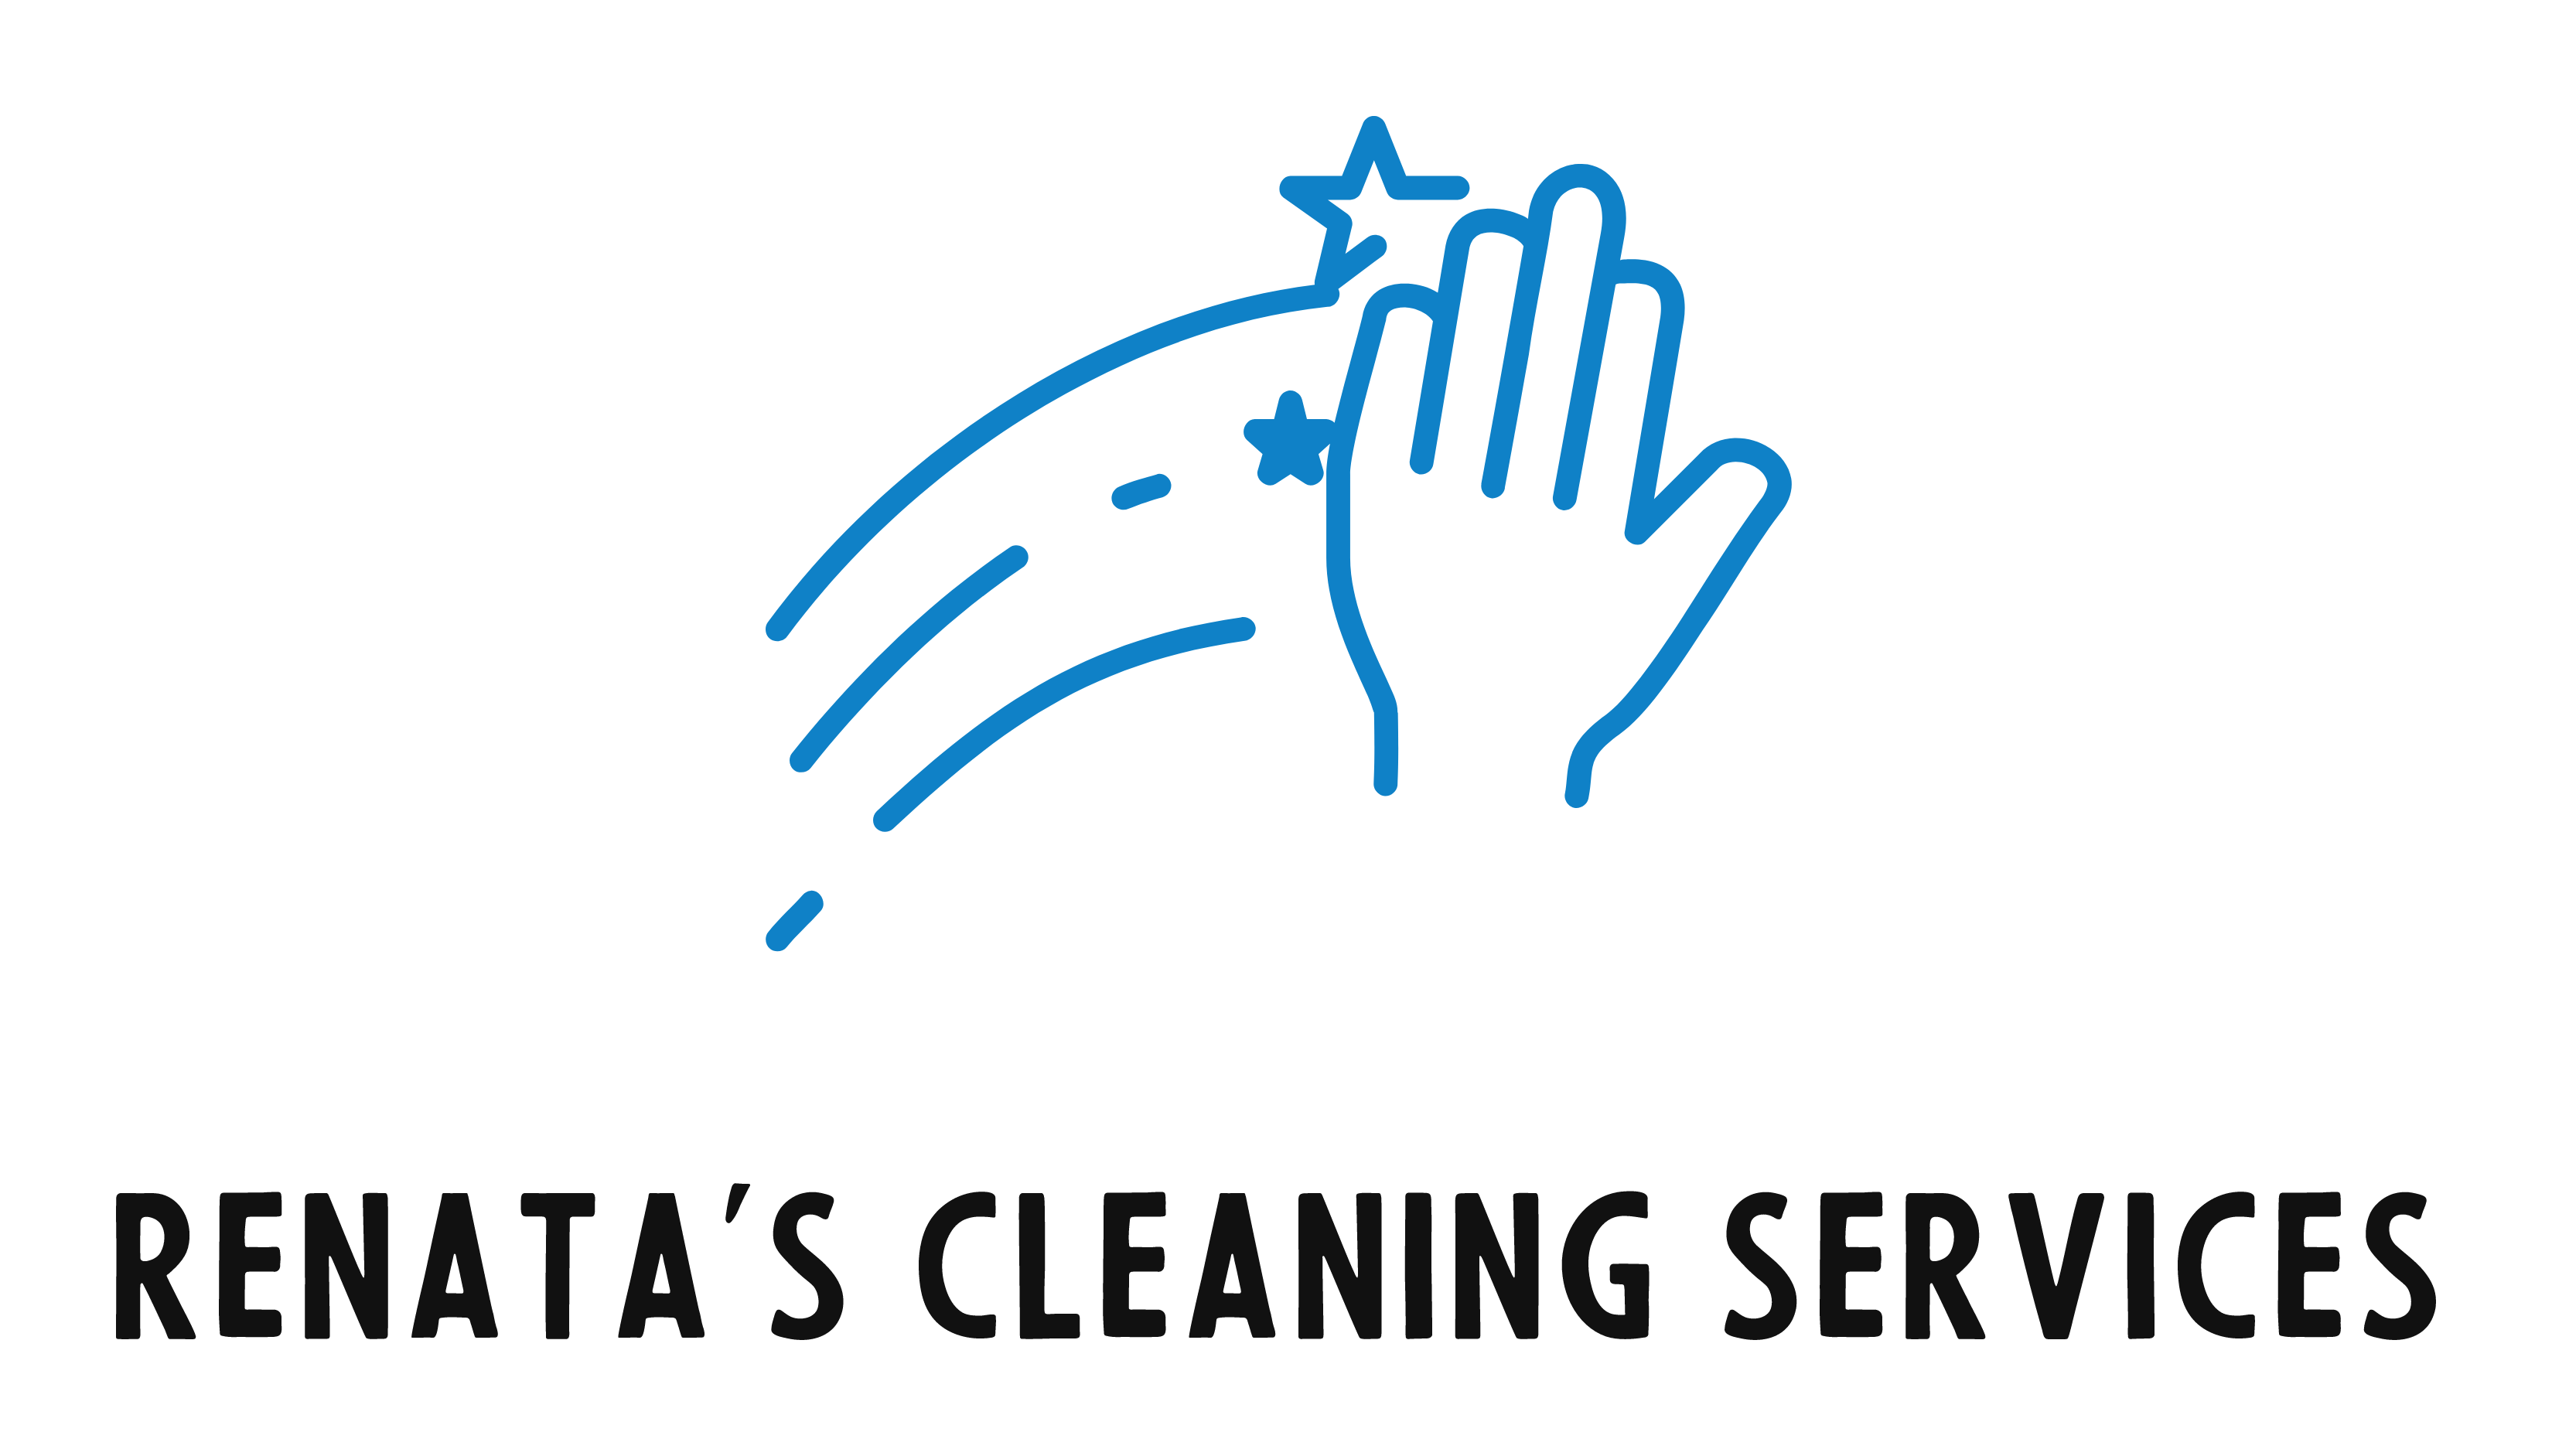 Renata's Cleaning Services